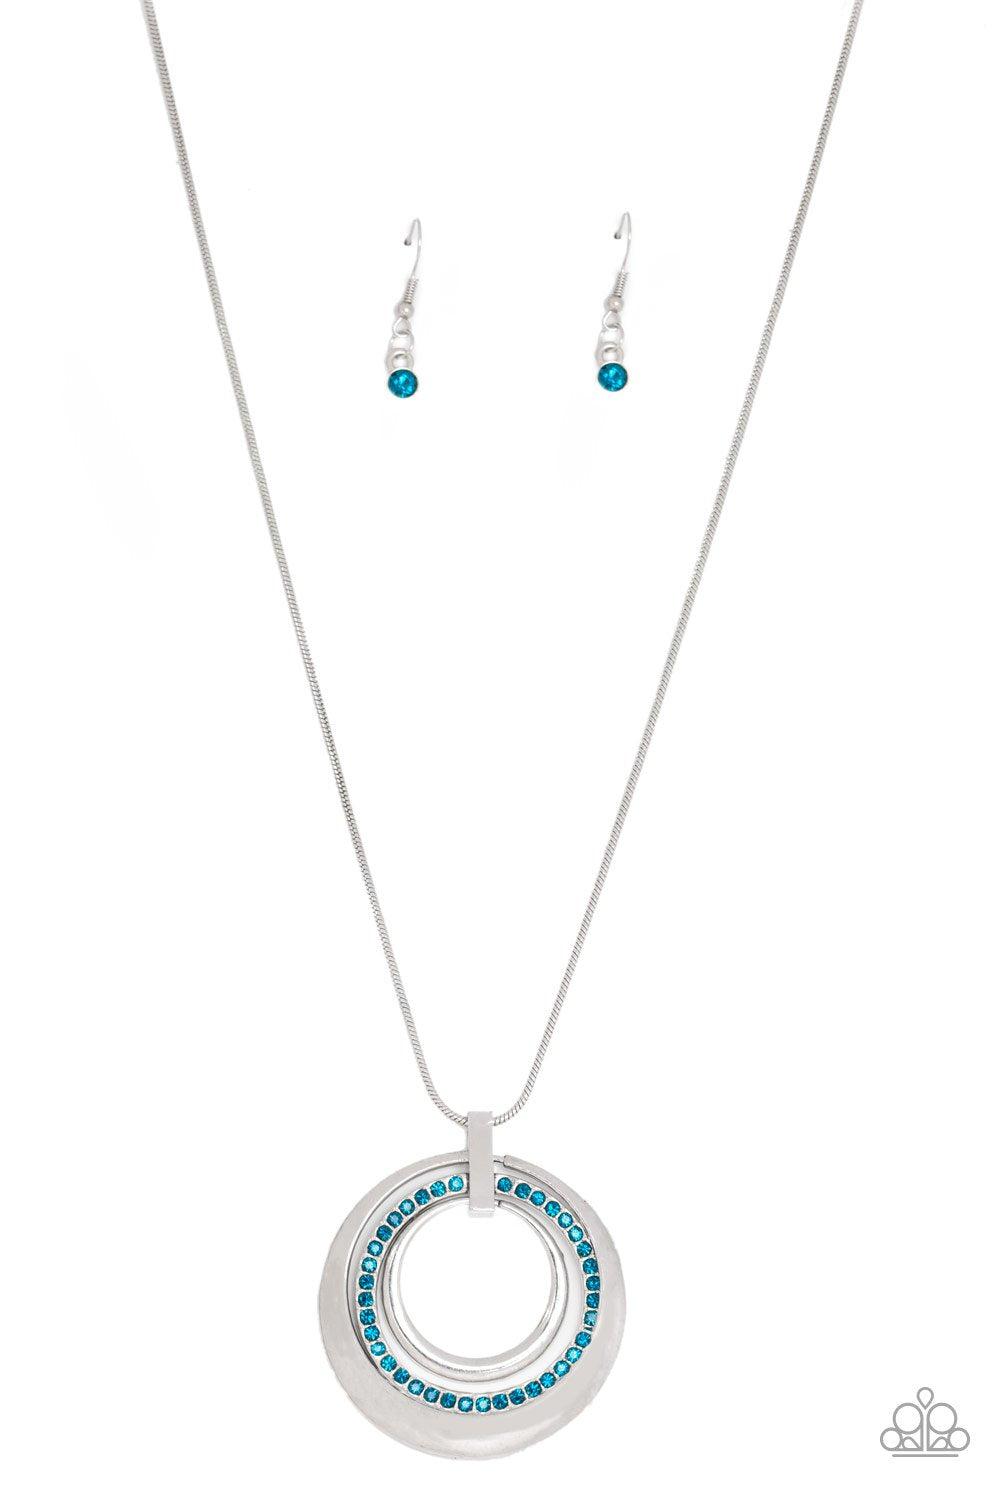 Gather Around Gorgeous Blue and Silver Pendant Necklace - Paparazzi Accessories- lightbox - CarasShop.com - $5 Jewelry by Cara Jewels